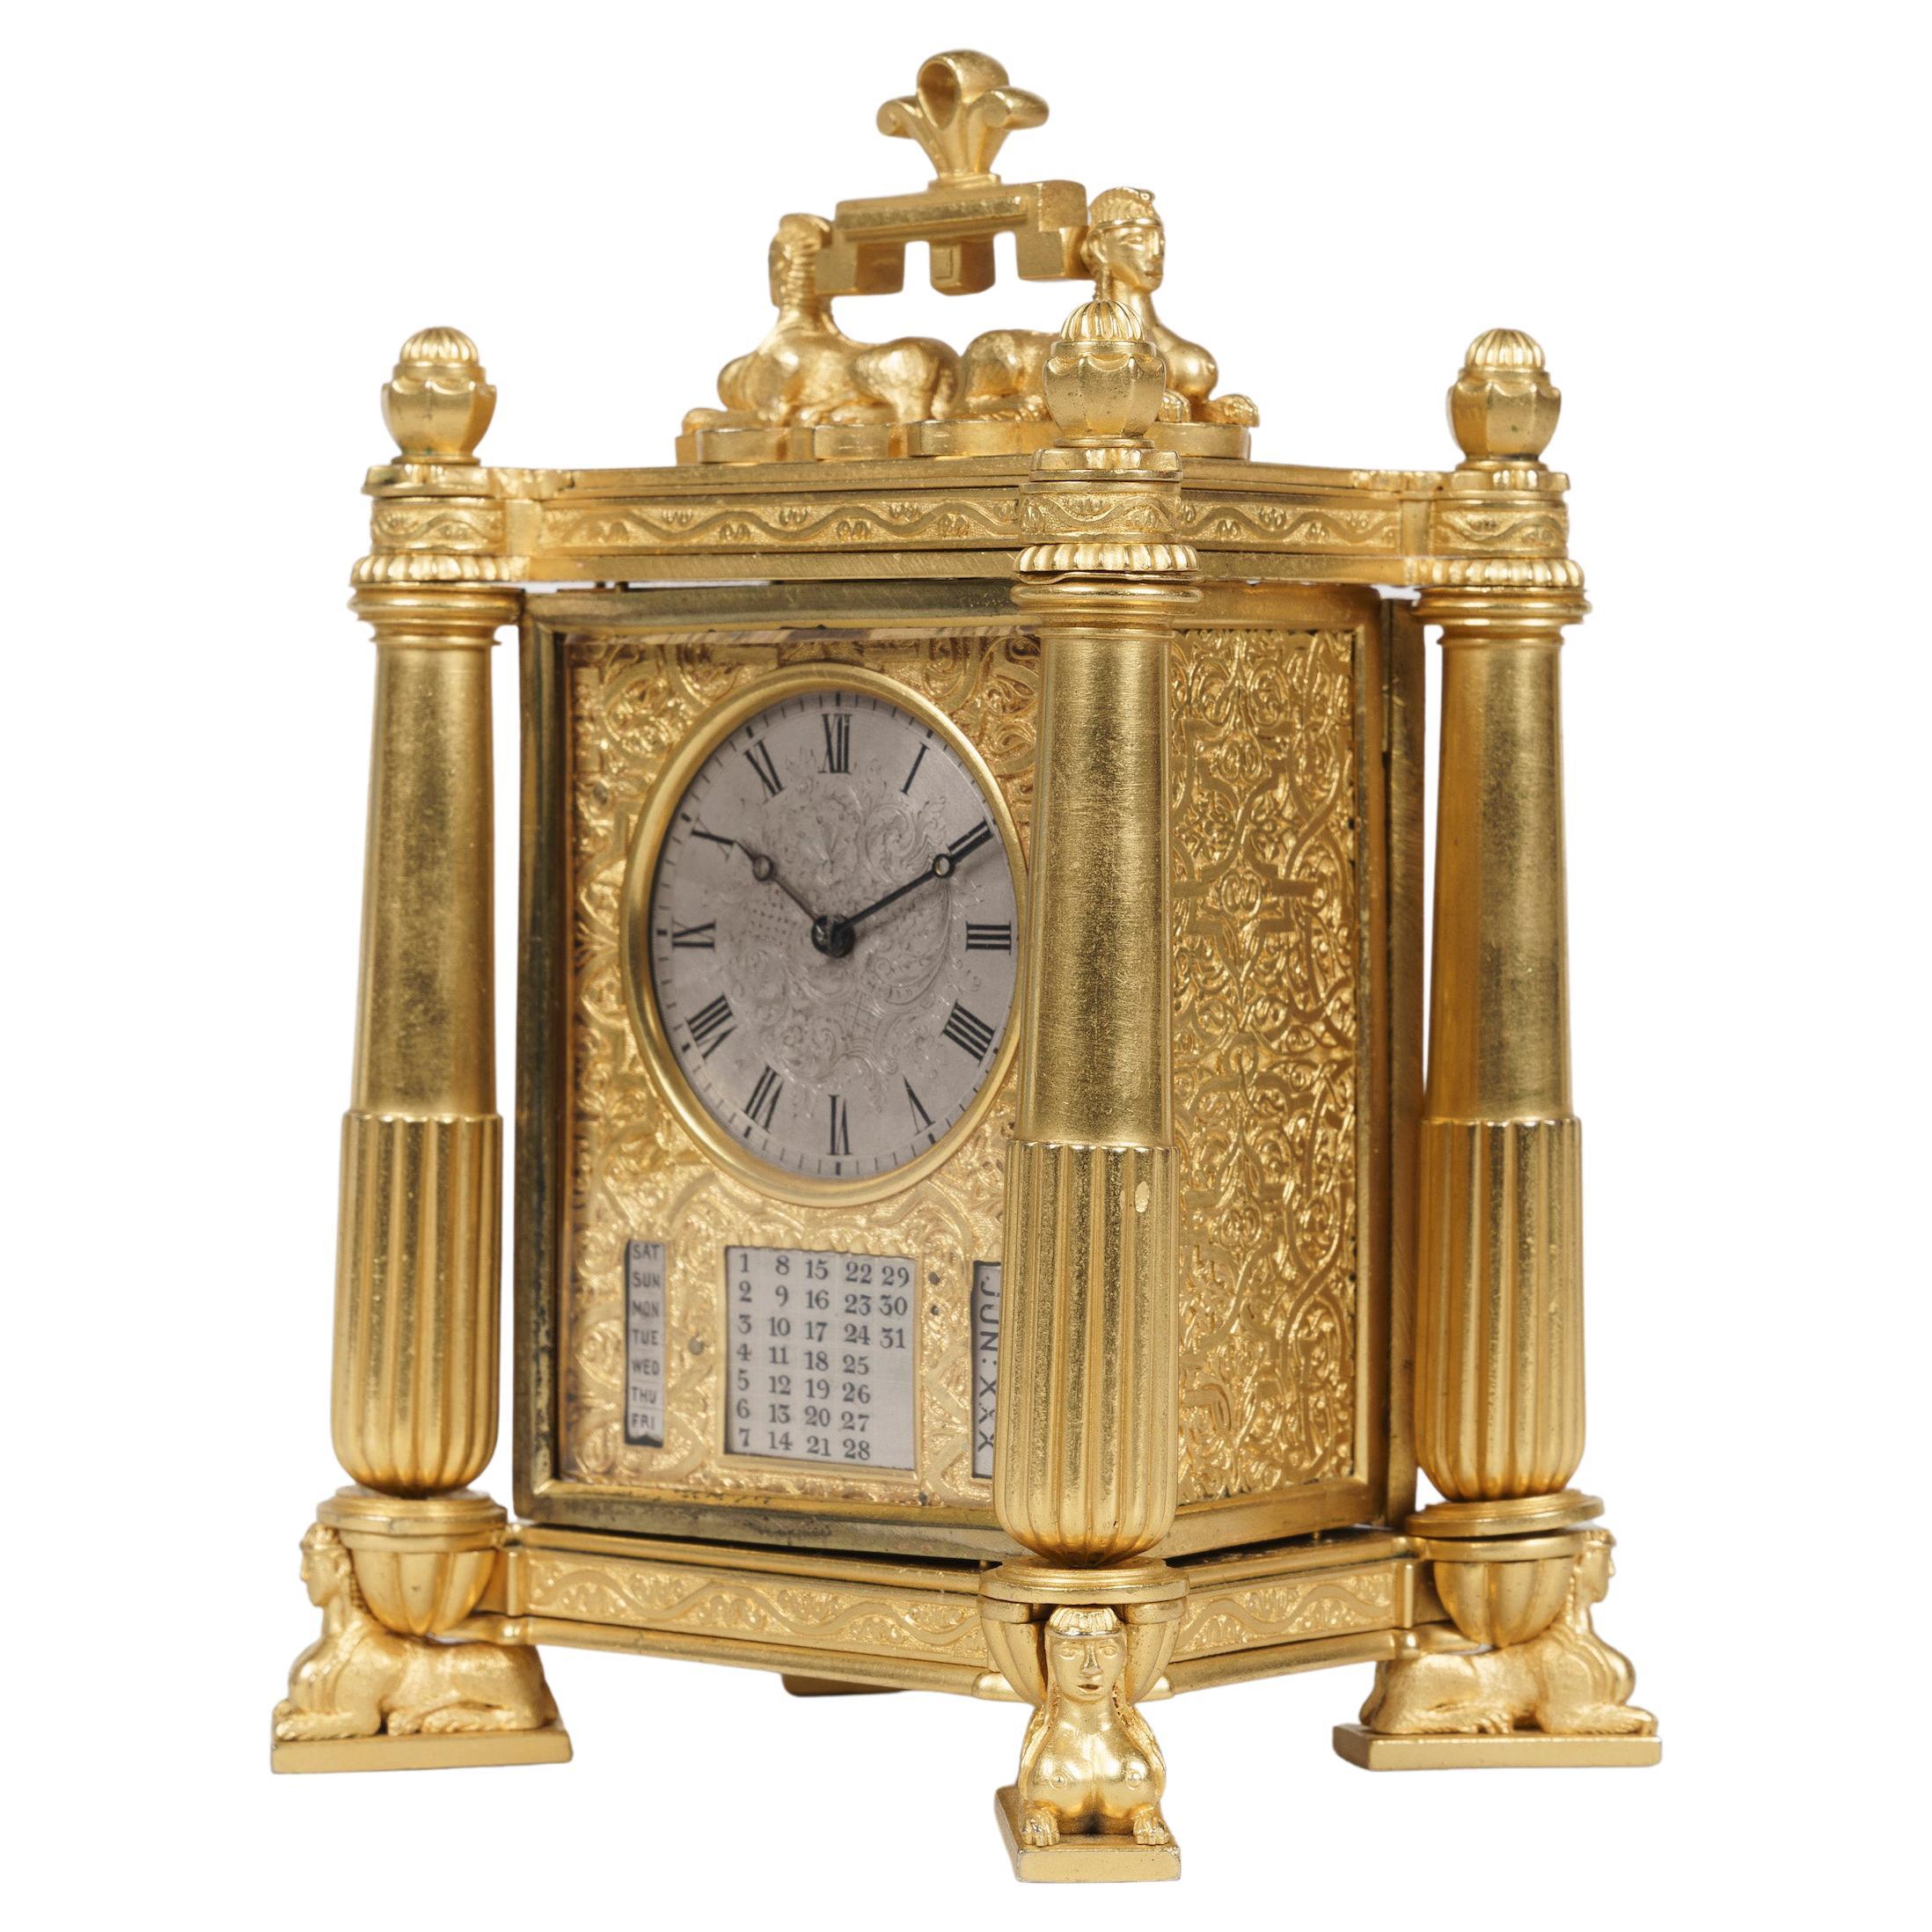 Antique 'Egyptian' Style Carriage Clock in the Manner of Thomas Cole